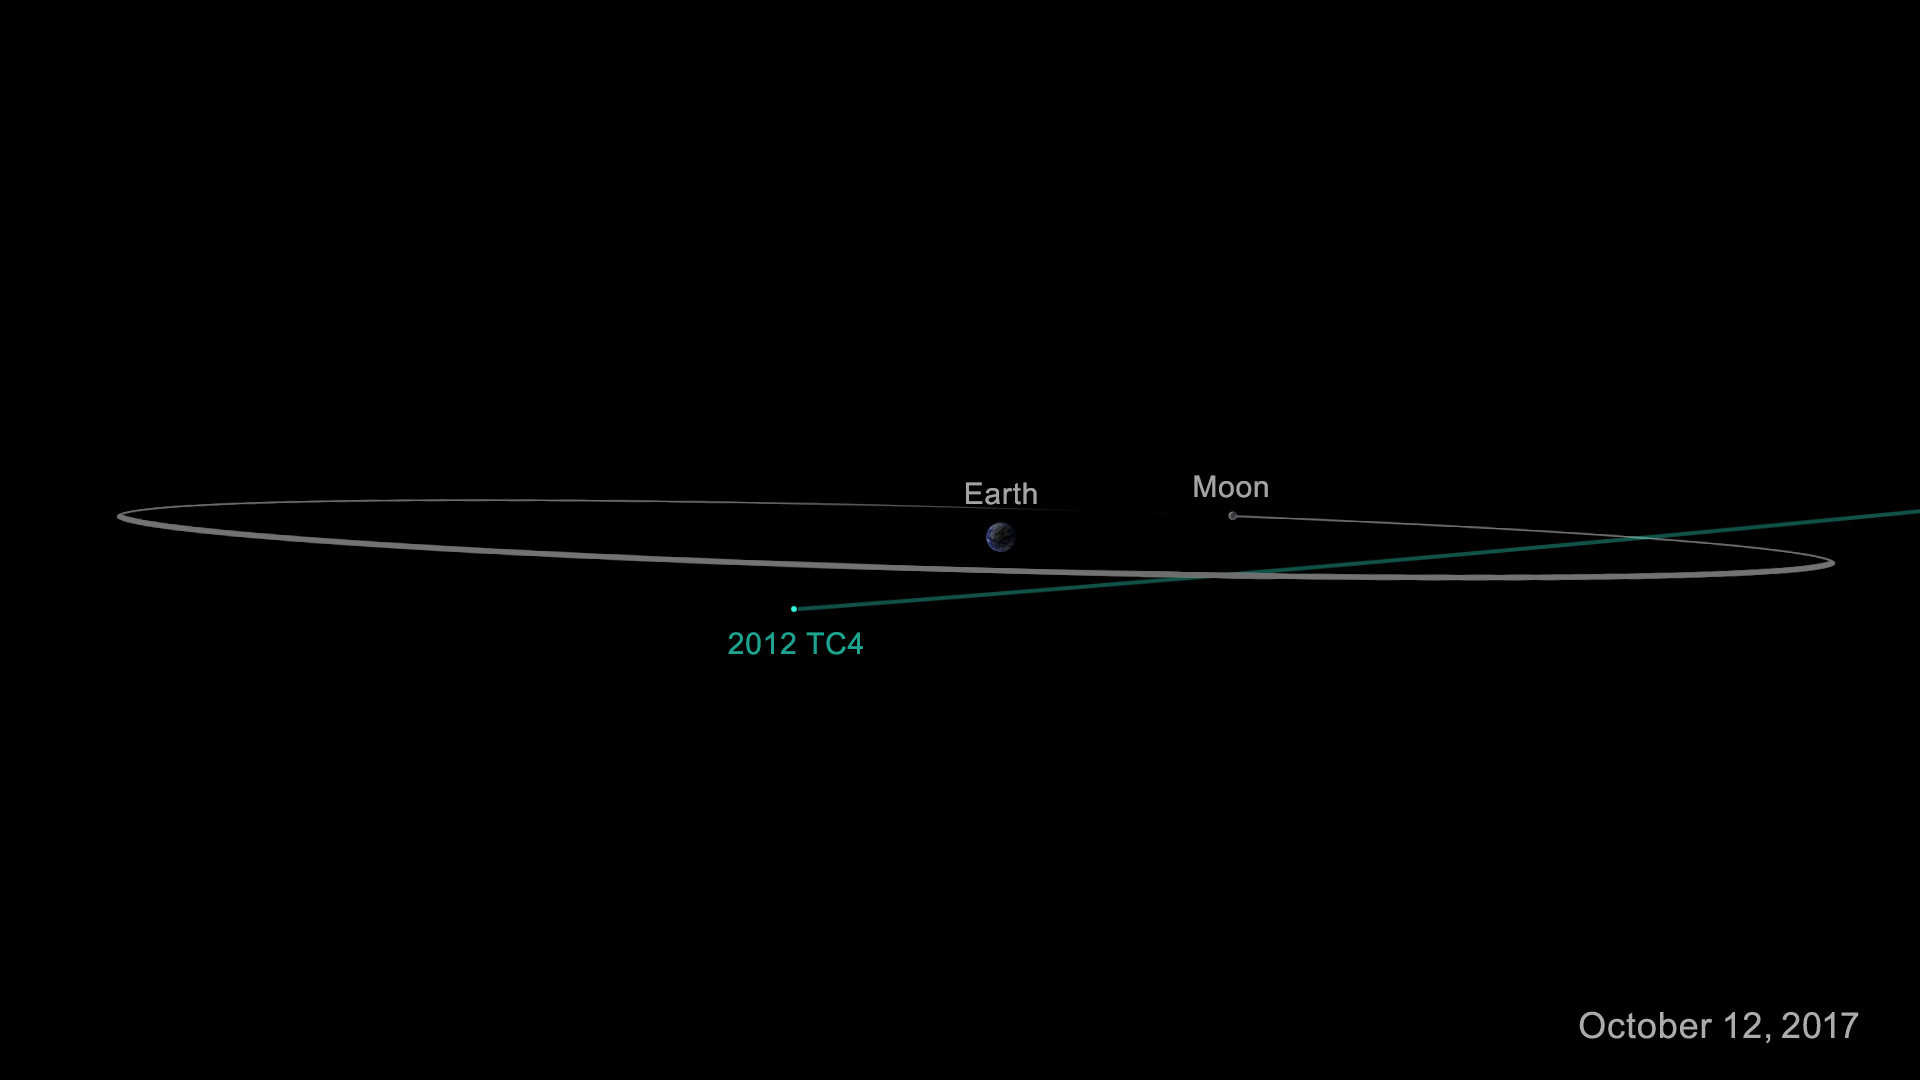 Diagram of asteroid 2012 TC4 as it safely passes Earth